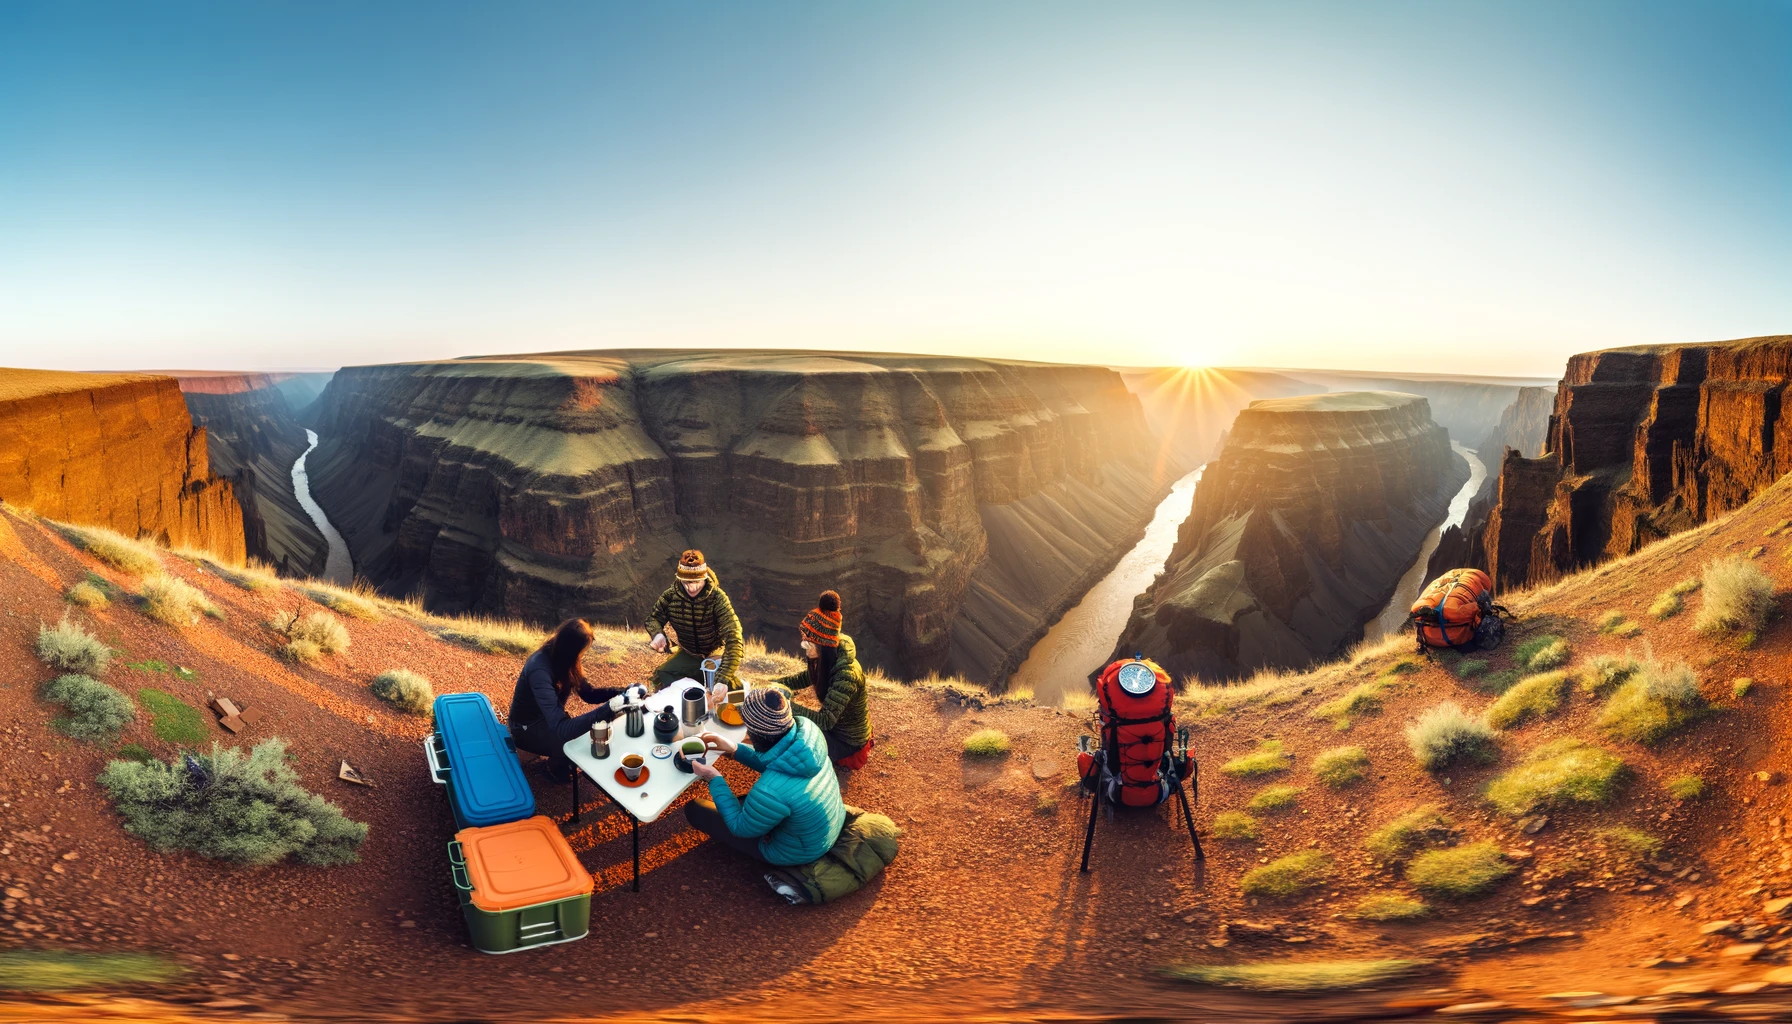 A view of an adventurous tea time set in a breathtaking outdoor location. The scene captures a group of friends gathered